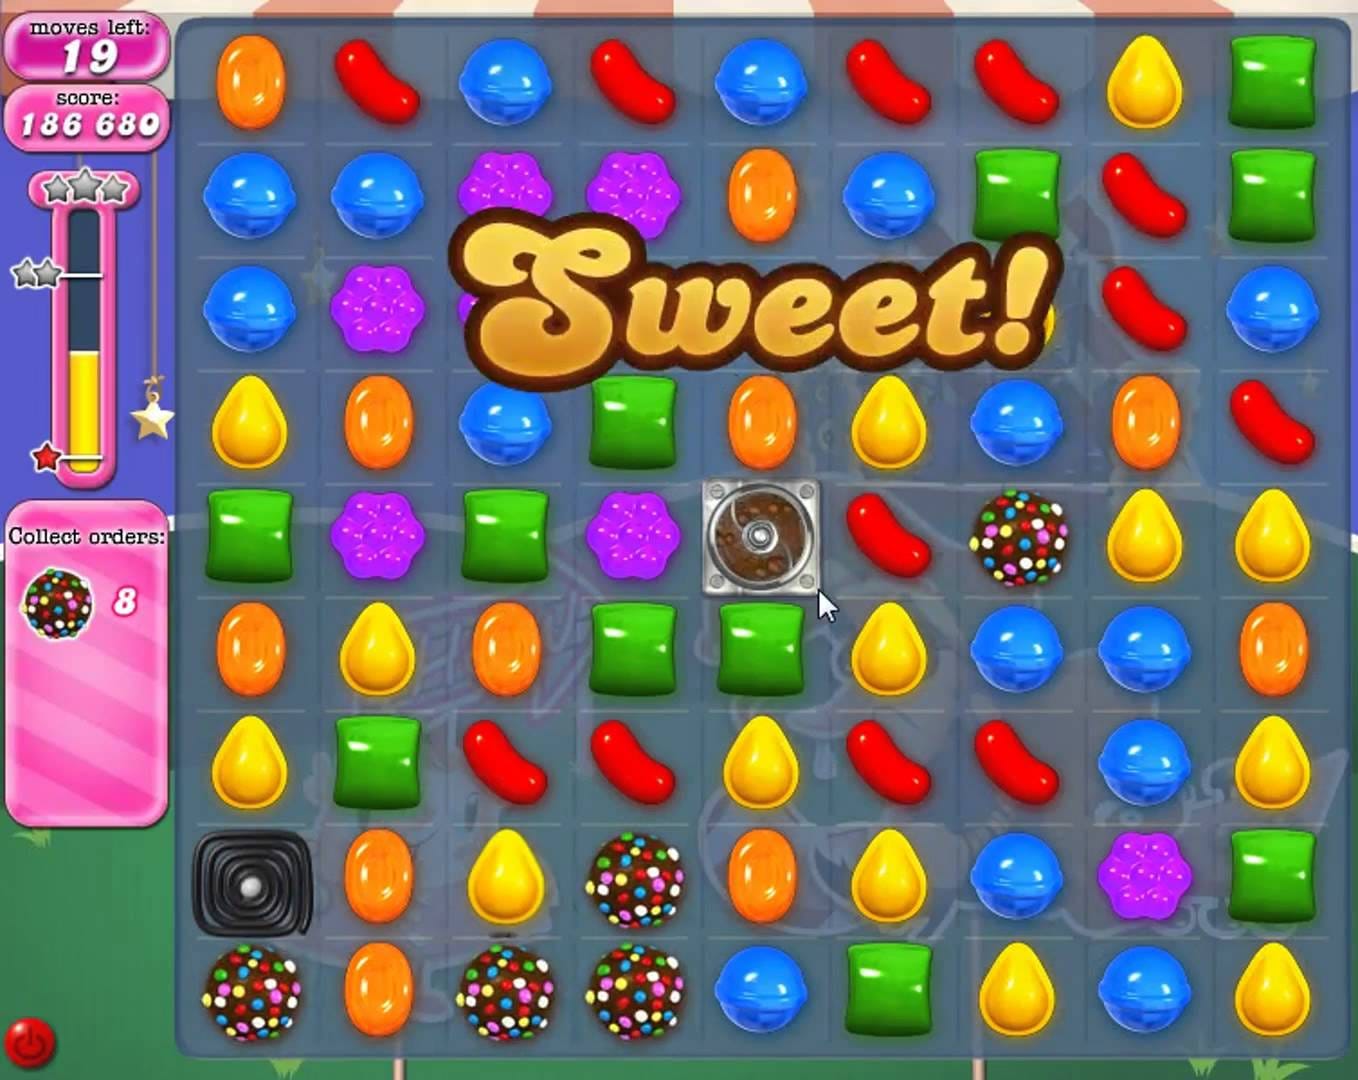 9 things I learned about life from playing Candy Crush., by Ami Ben-David